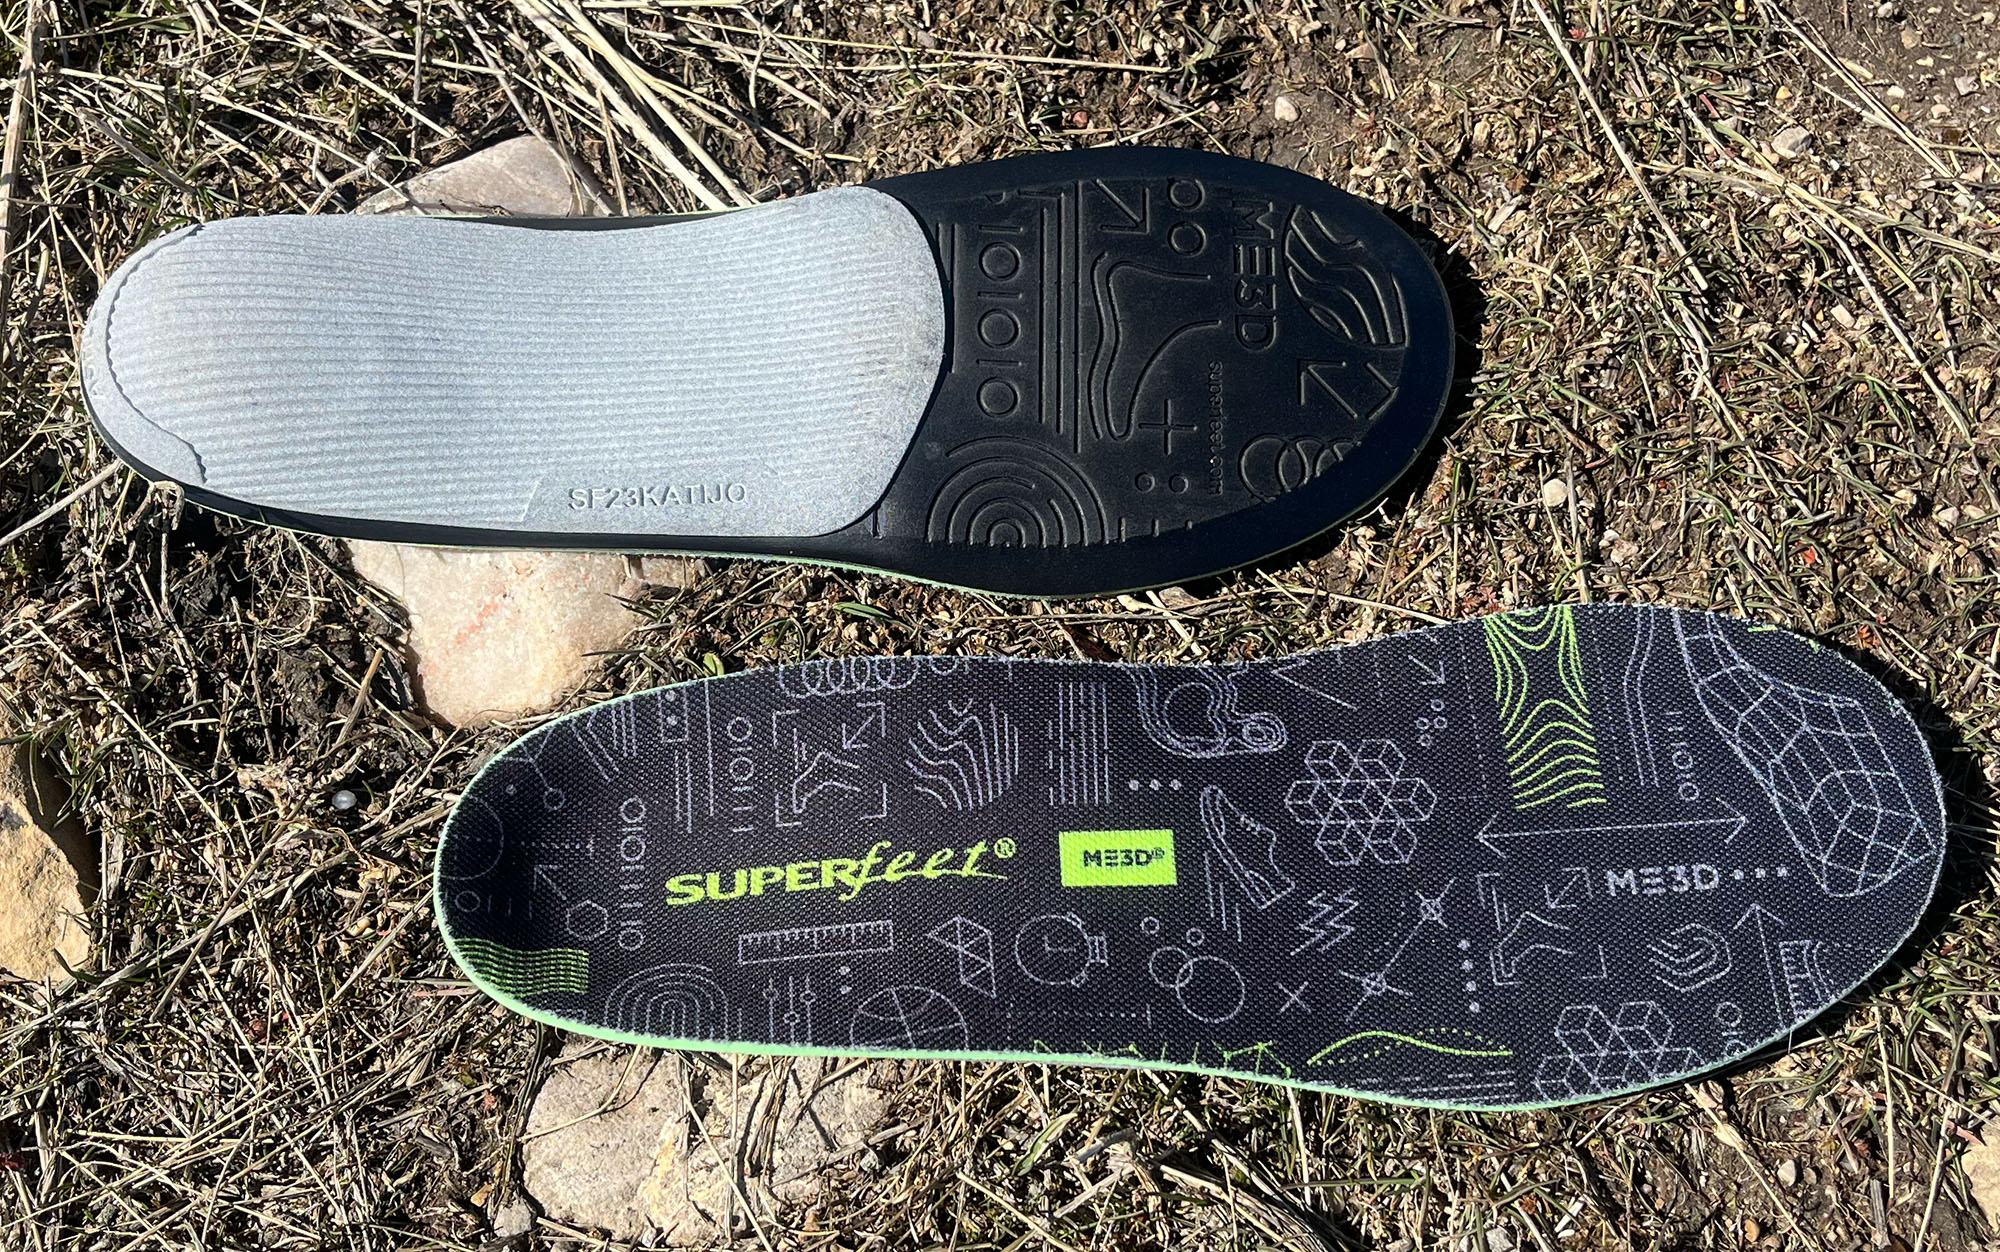 The Superfeet ME3D are some of the best insoles for hiking.